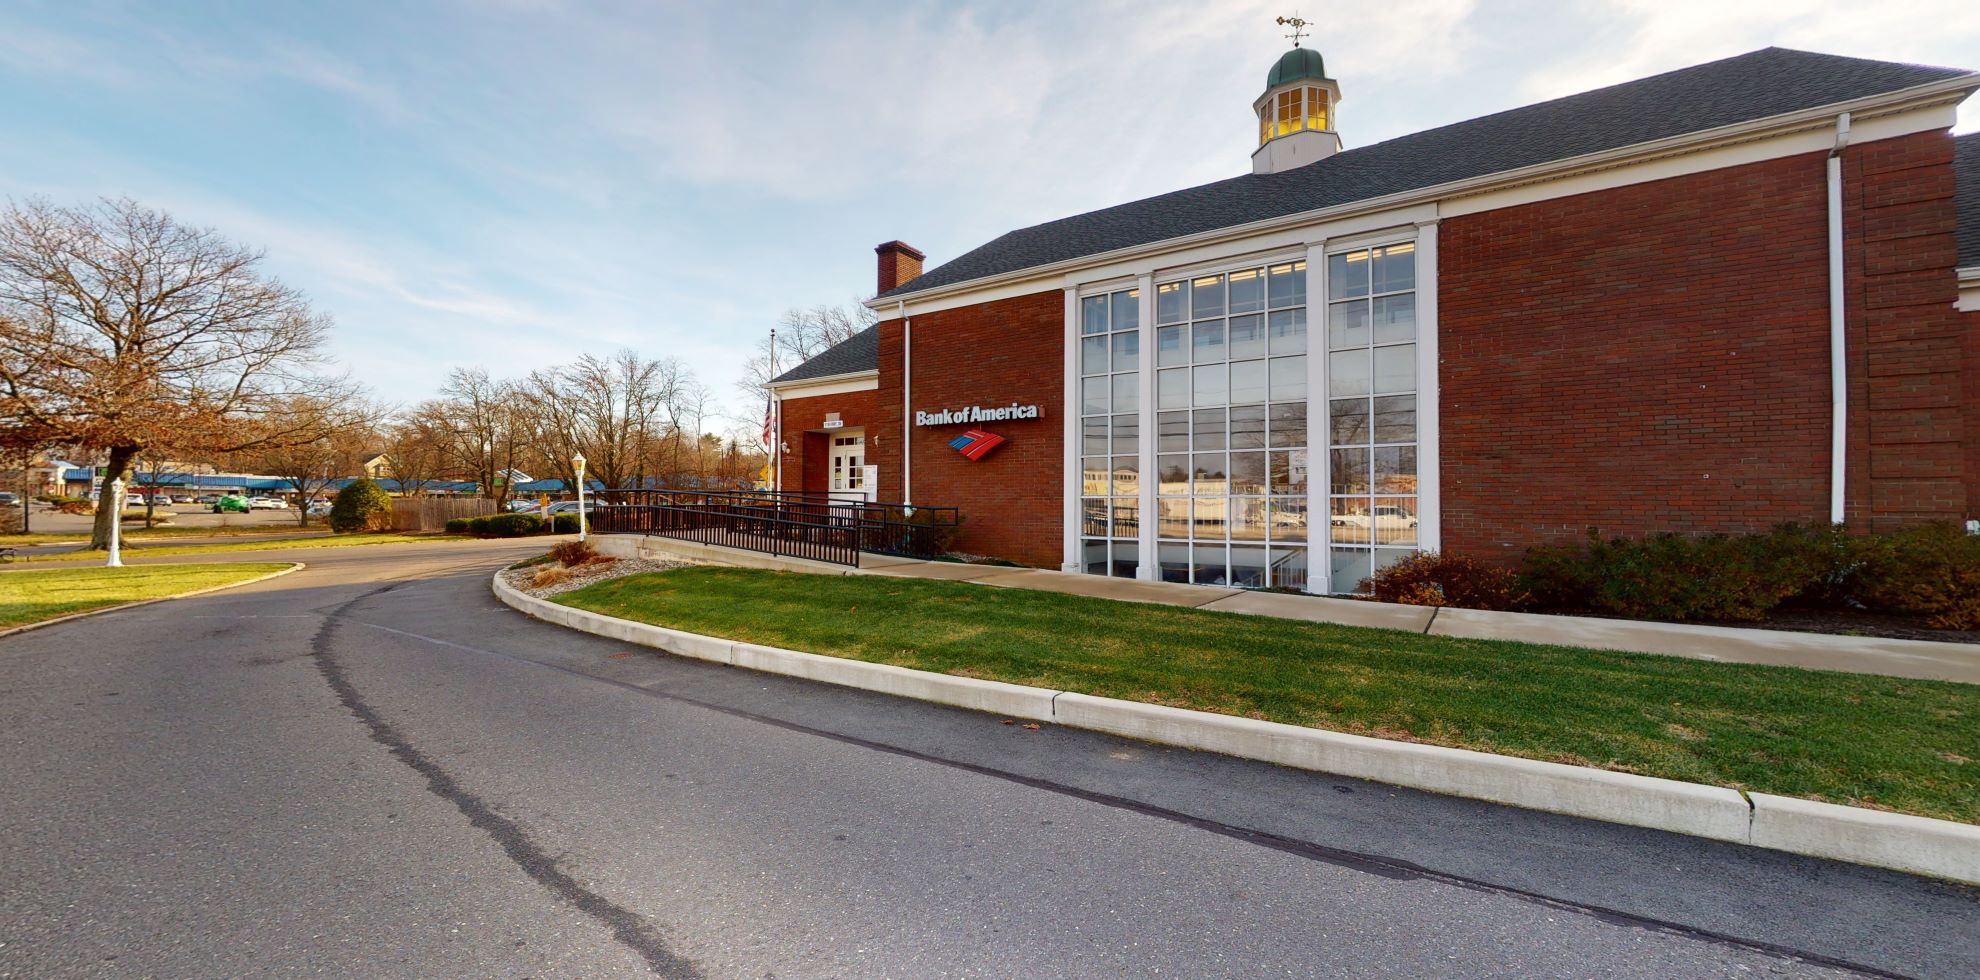 Bank of America financial center with drive-thru ATM | 1184 Highway 35, Middletown, NJ 07748